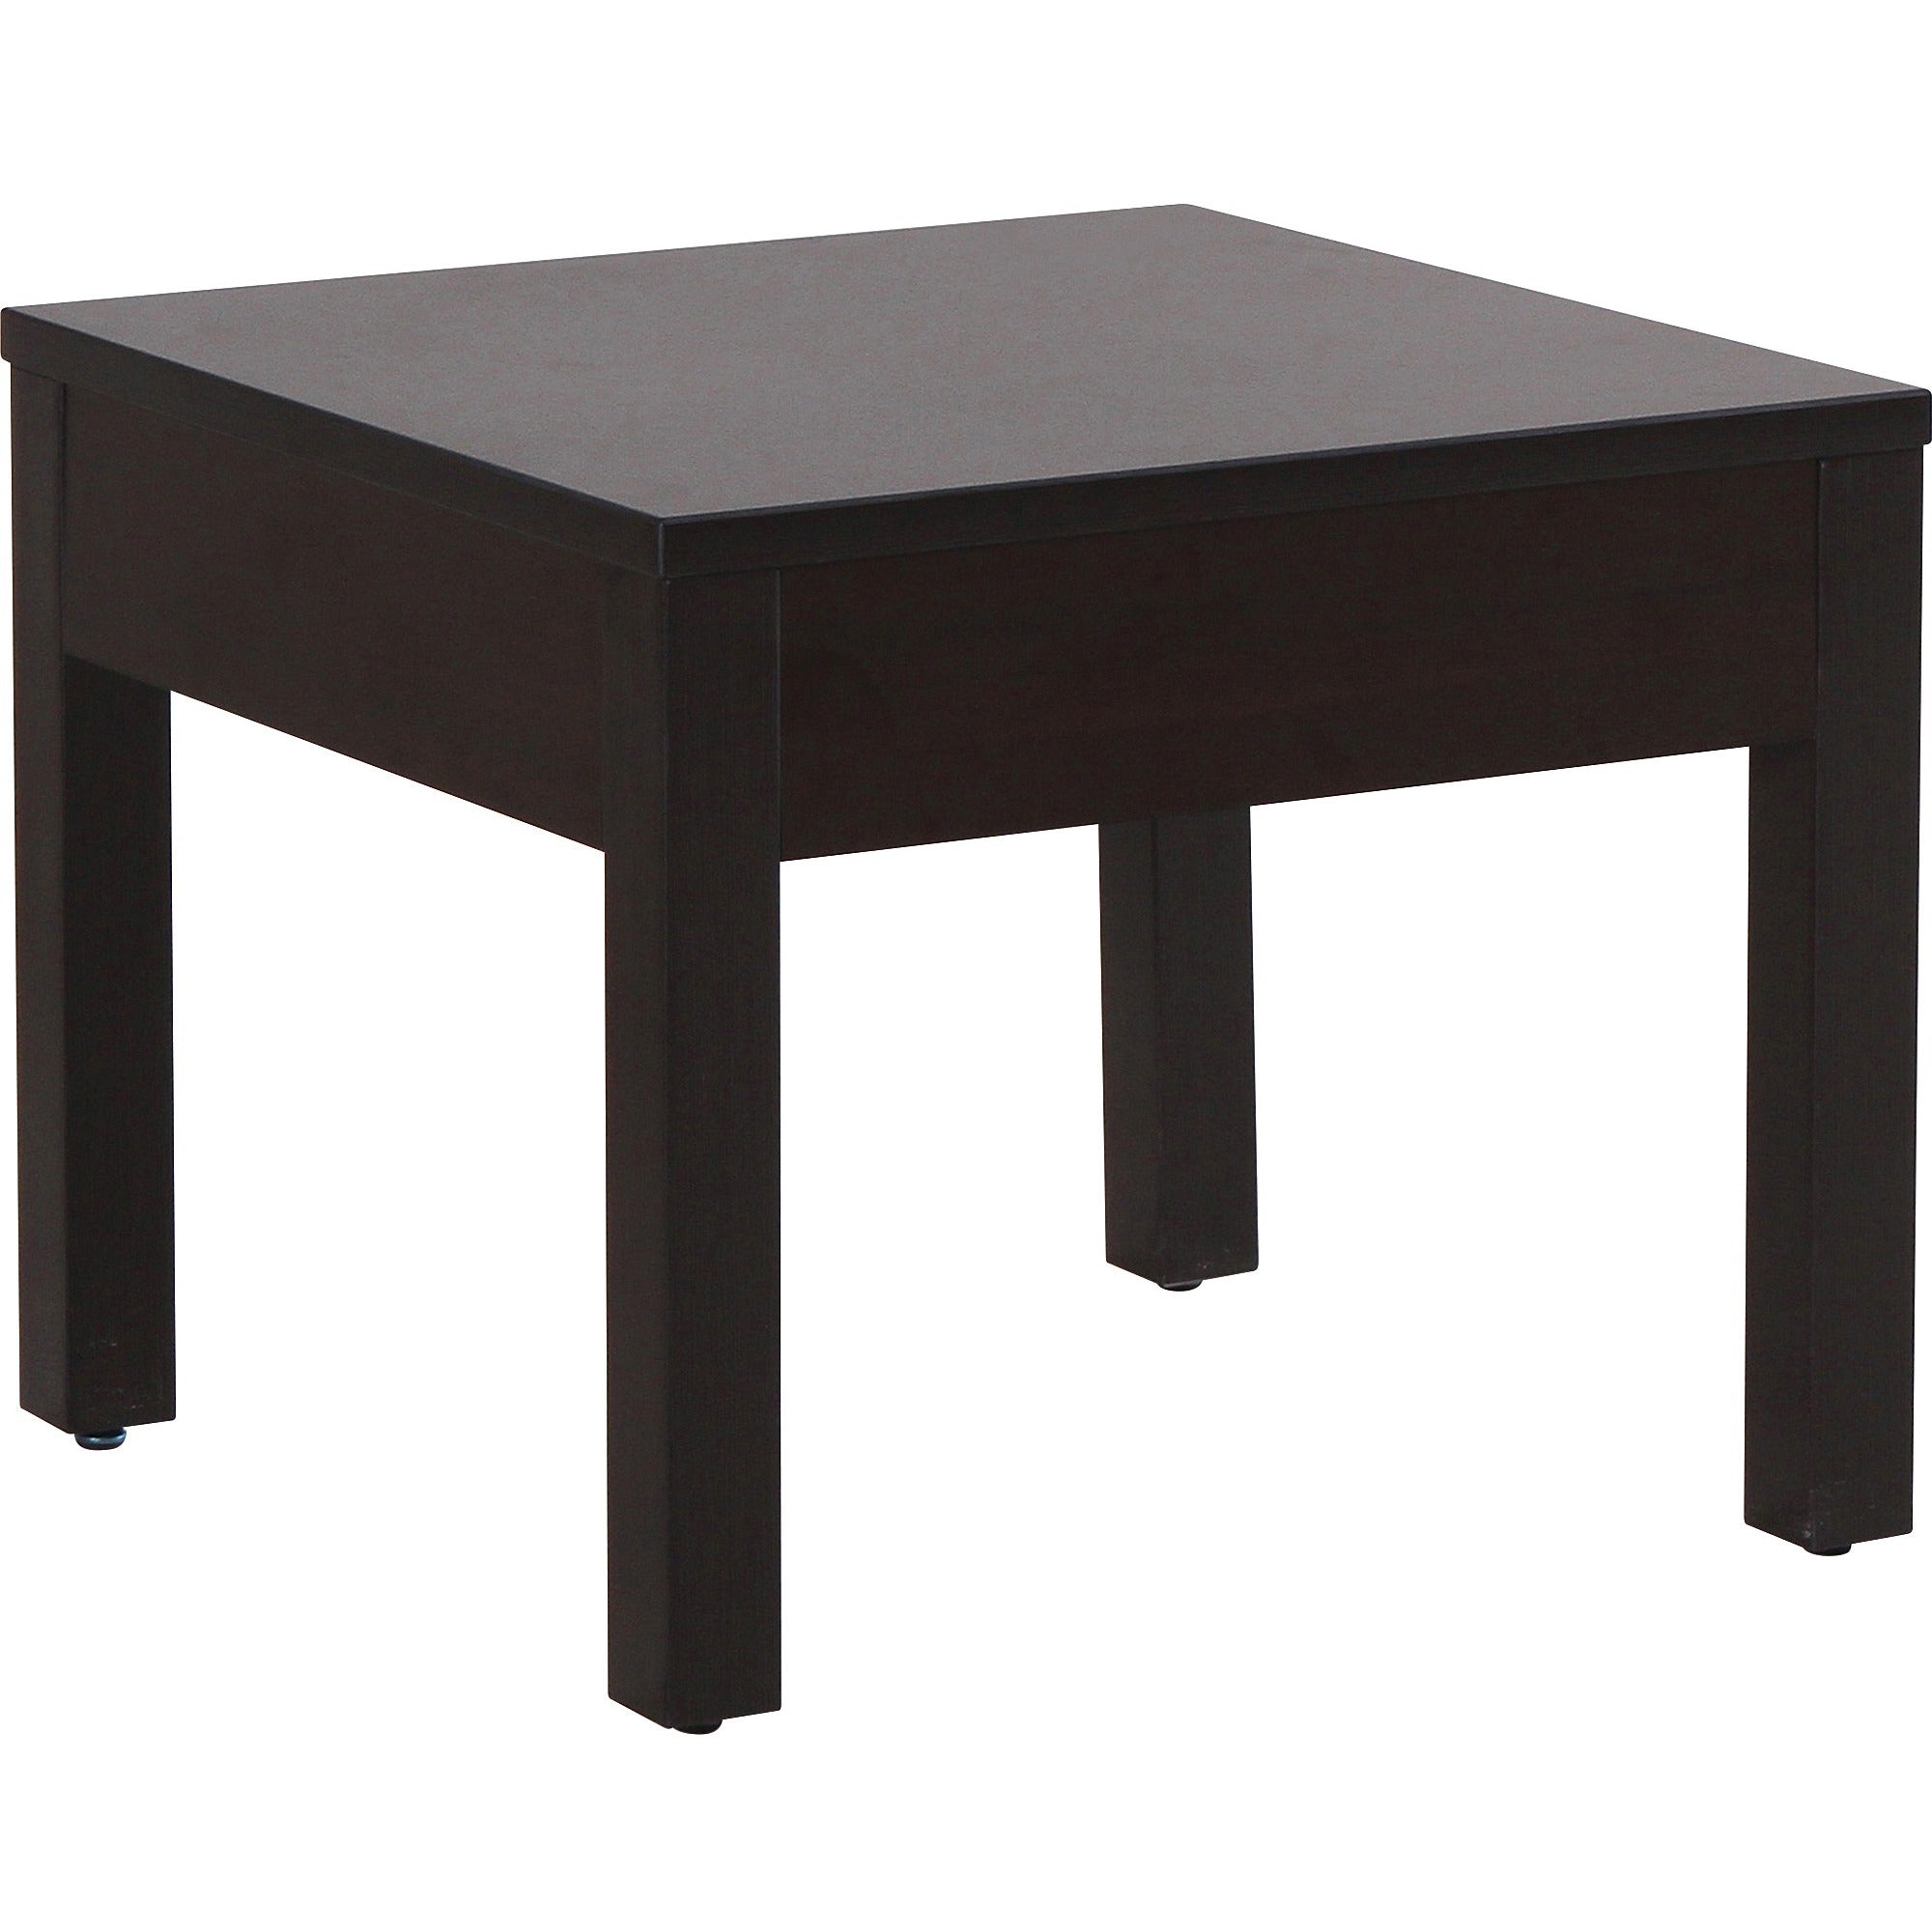 Lorell Occasional Corner Table - For - Table TopSquare Top - Square Leg Base - 24" Table Top Length x 24" Table Top Width x 1" Table Top Thickness - 20" Height x 23.88" Width x 23.88" Depth - Assembly Required - Mahogany, Melamine - 1 Each - 